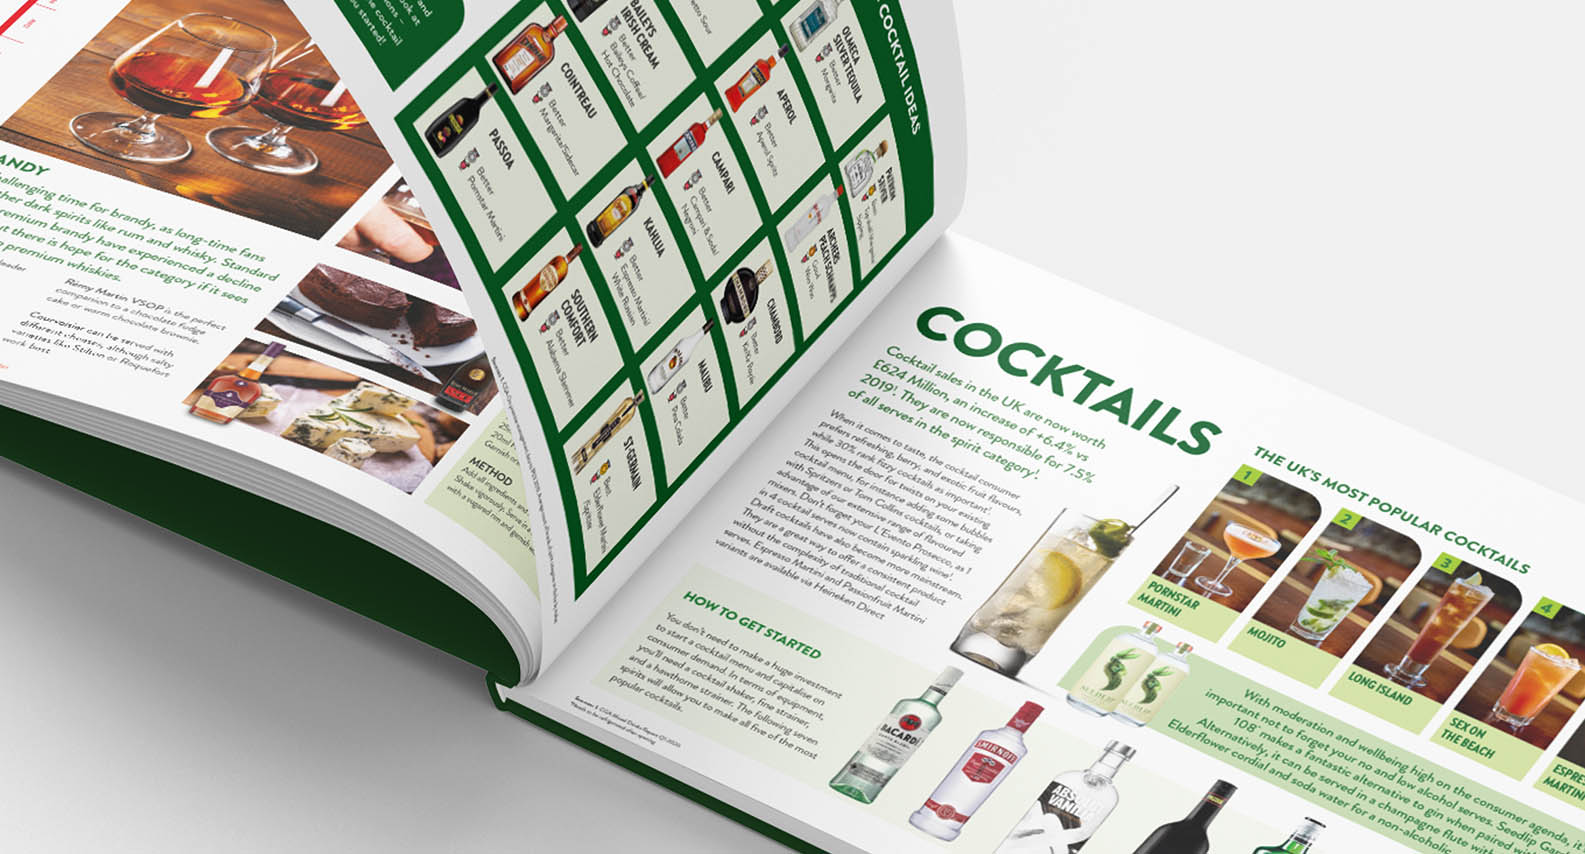 Grow your business cocktails